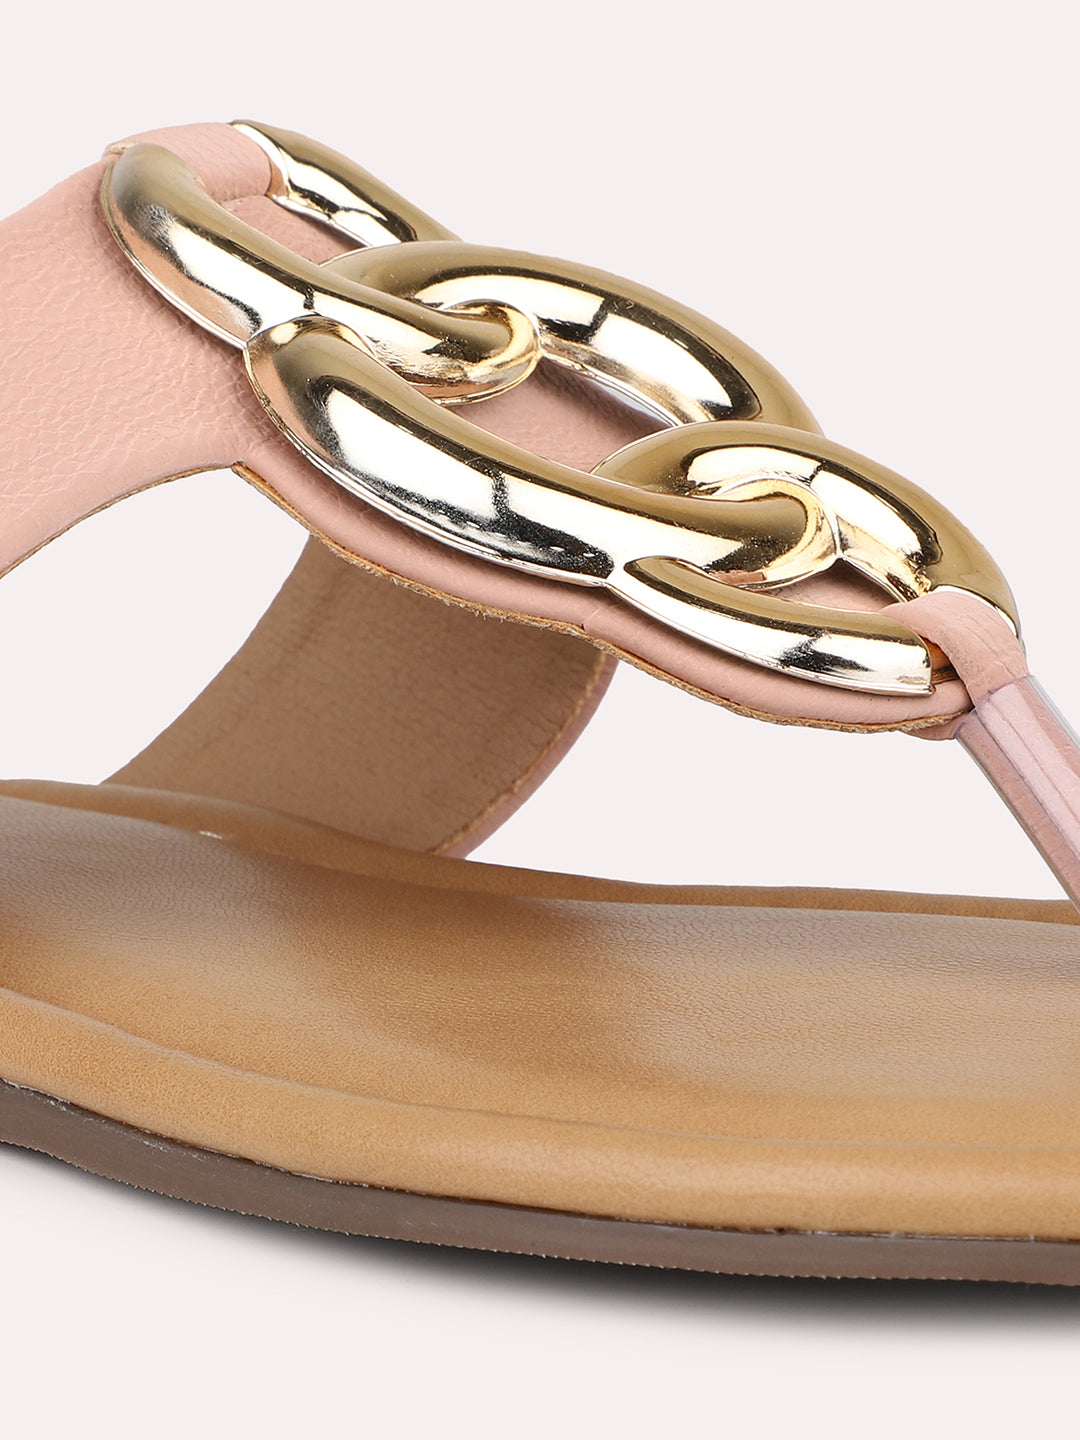 Women Peach And Gold-Toned T-Strap Flats With Buckles